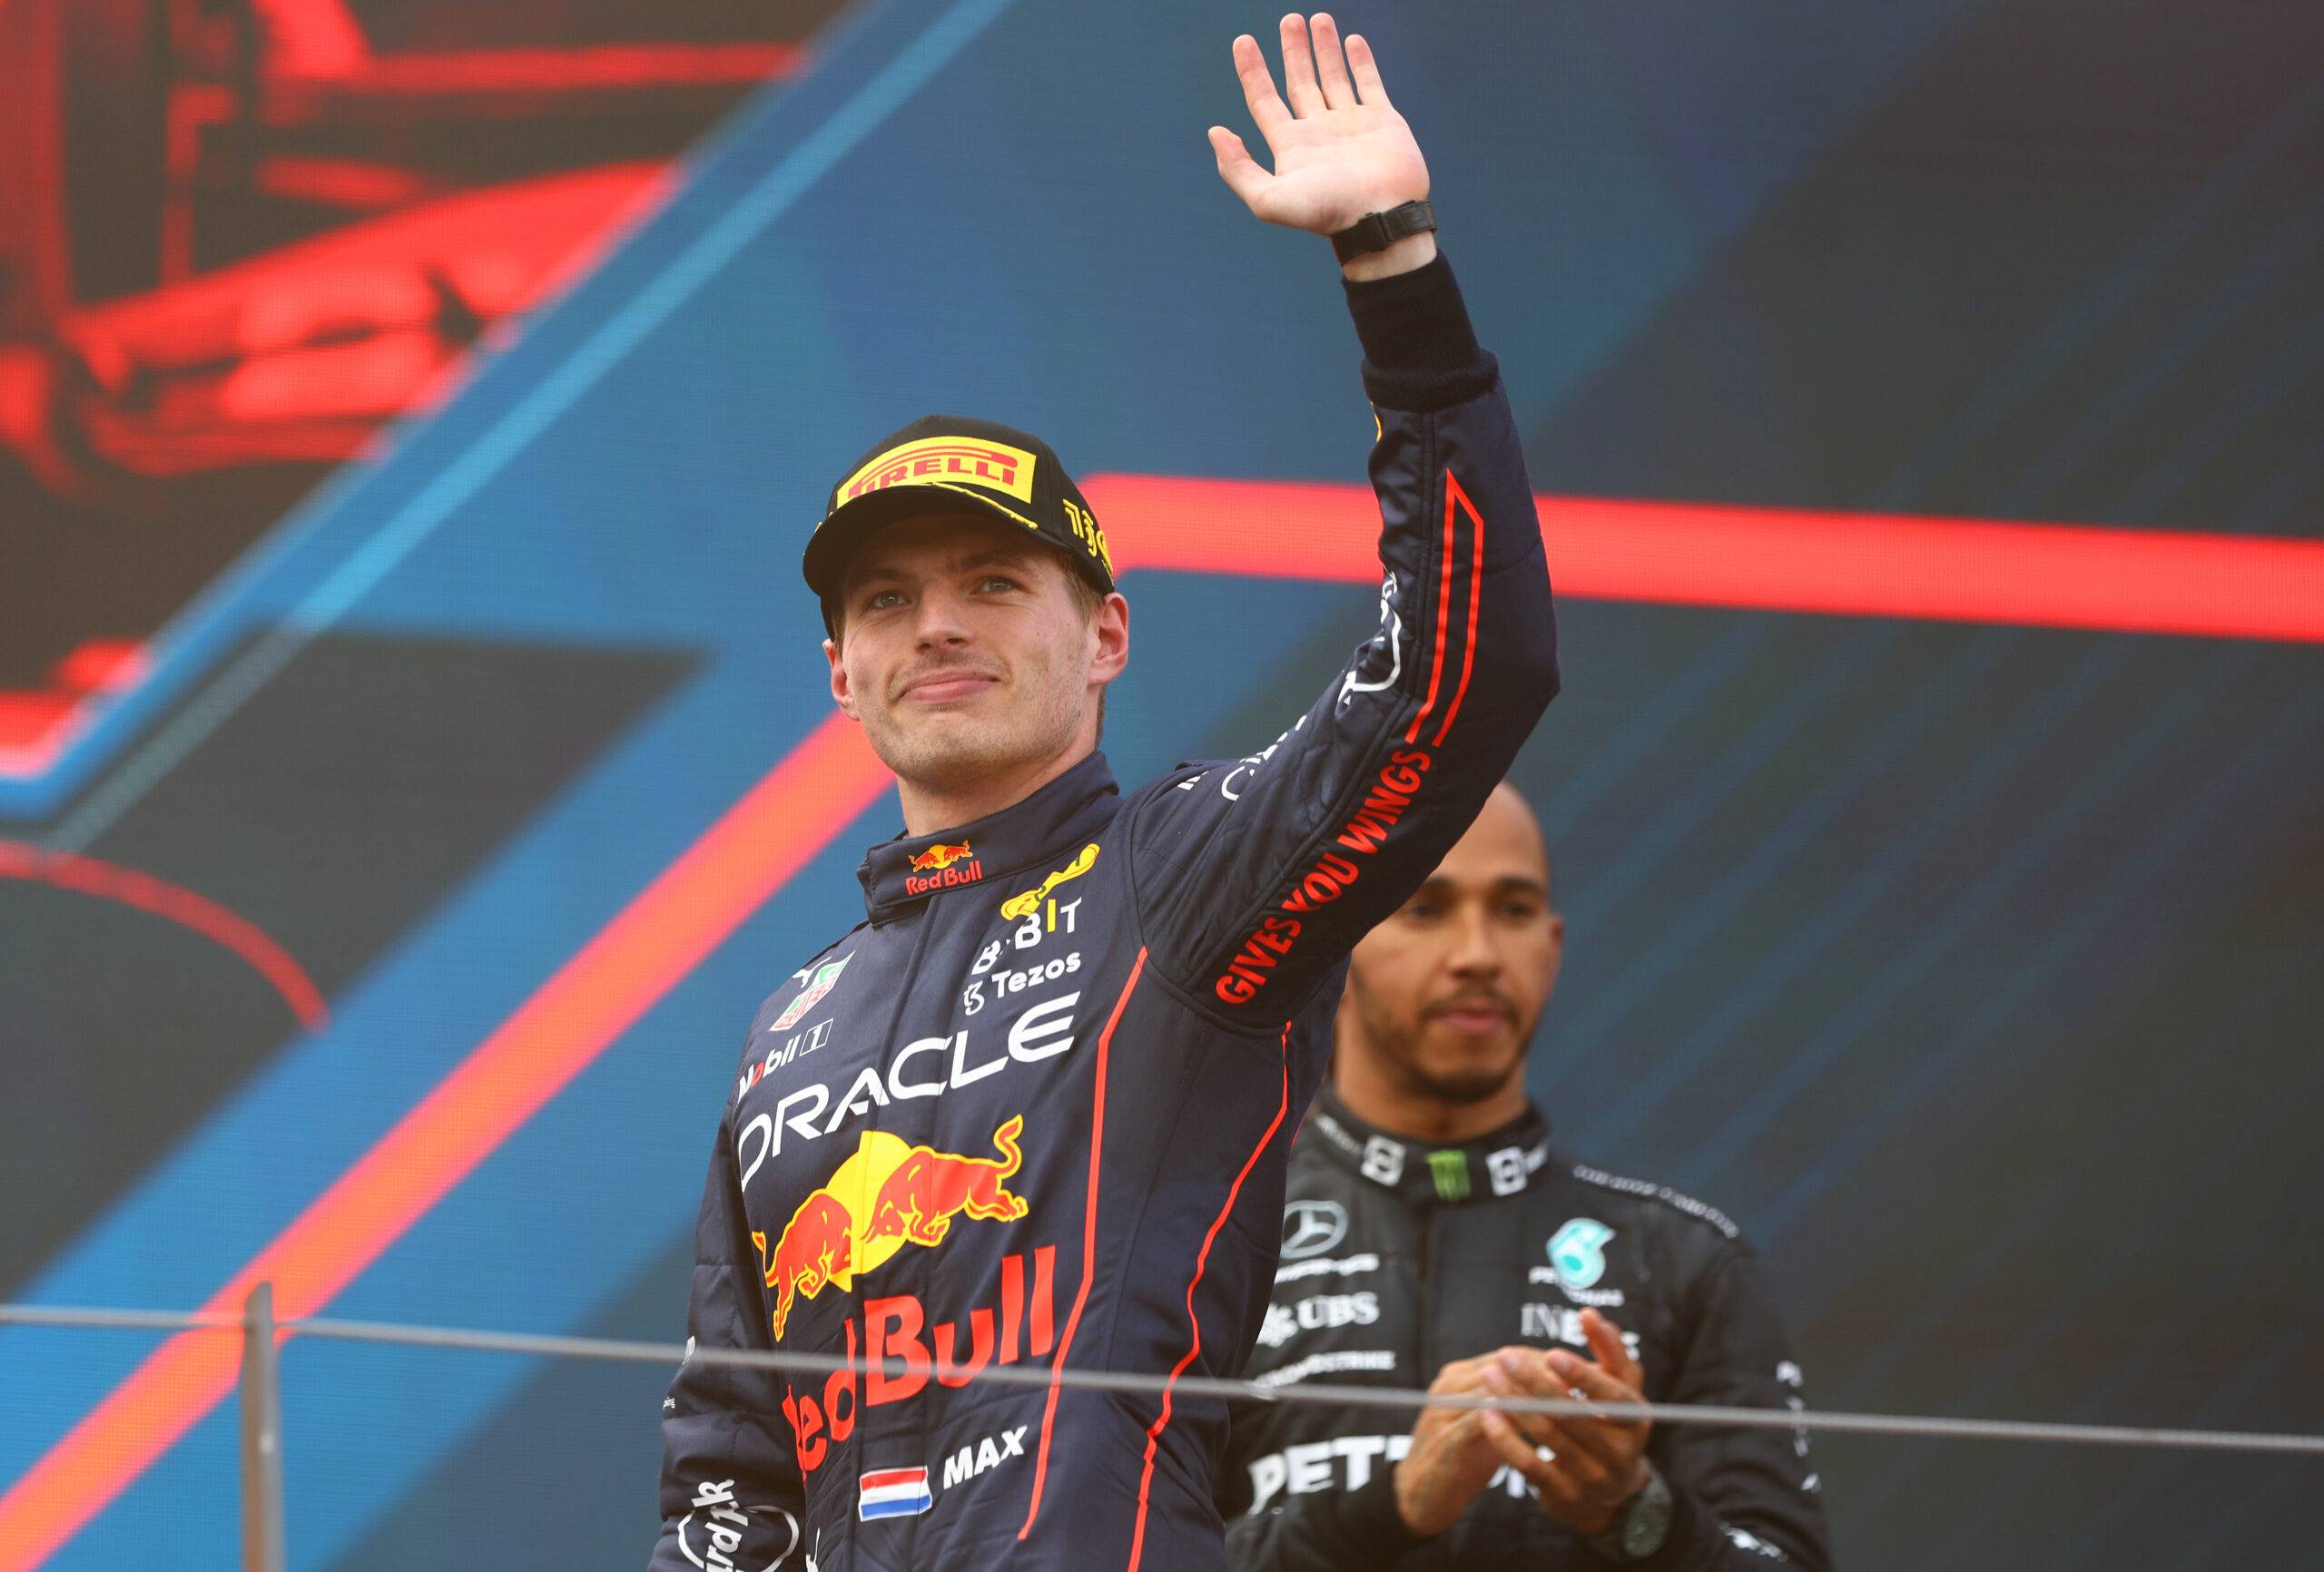 Max Verstappen after finishing second in Austria